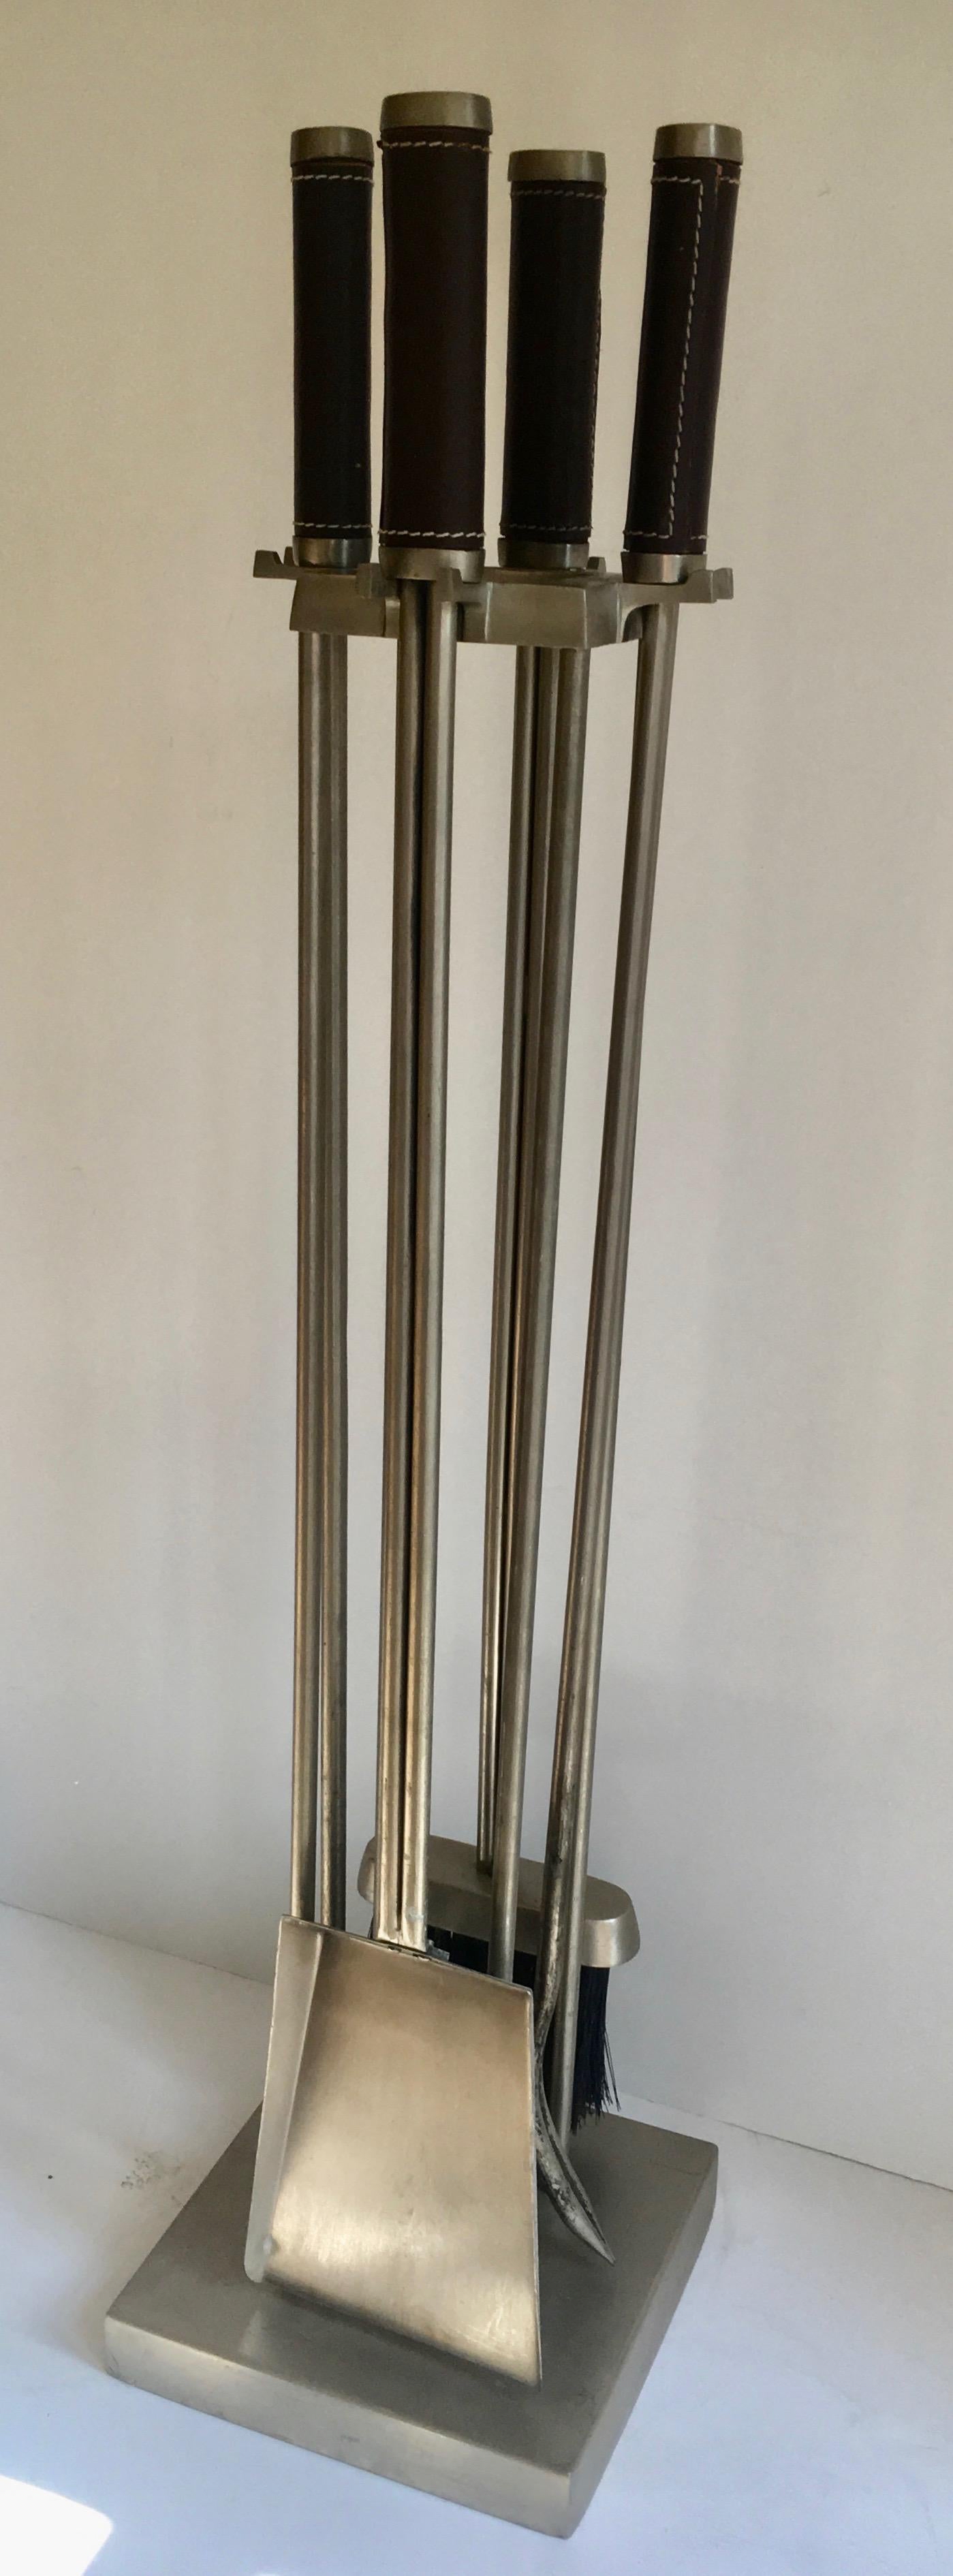 Five-Piece Brushed Aluminium and Leather Fireplace Tool Set on Stand 3